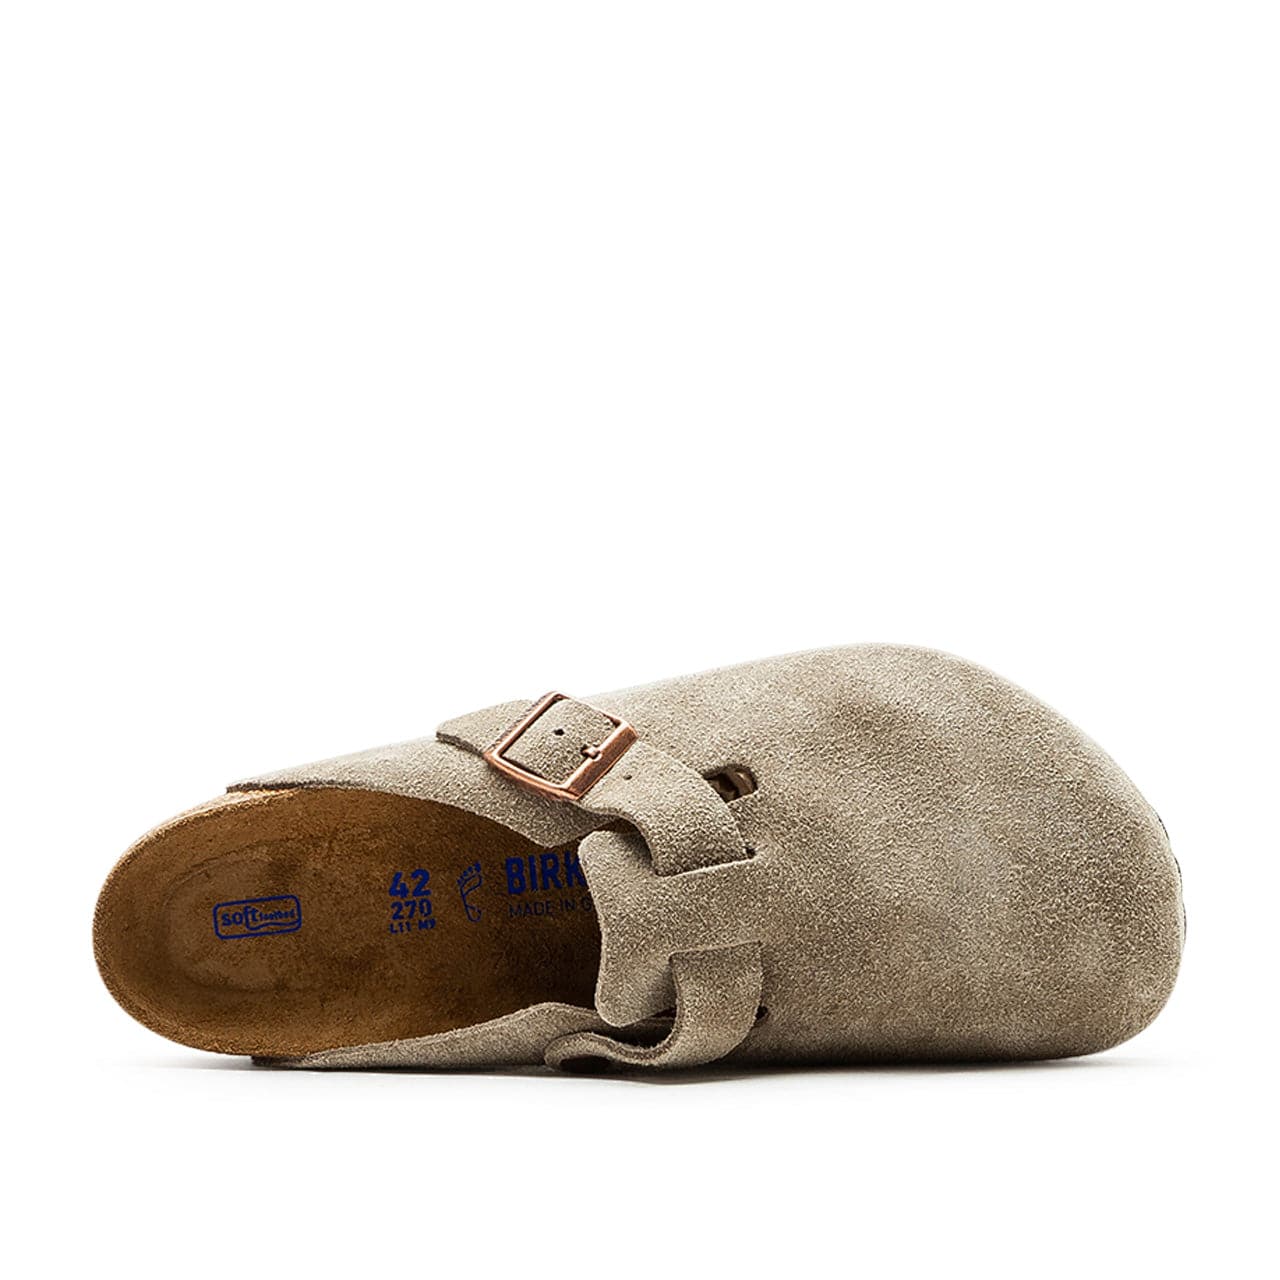 Birkenstock Boston Soft Footbed Suede Leather (Taupe)  - Allike Store